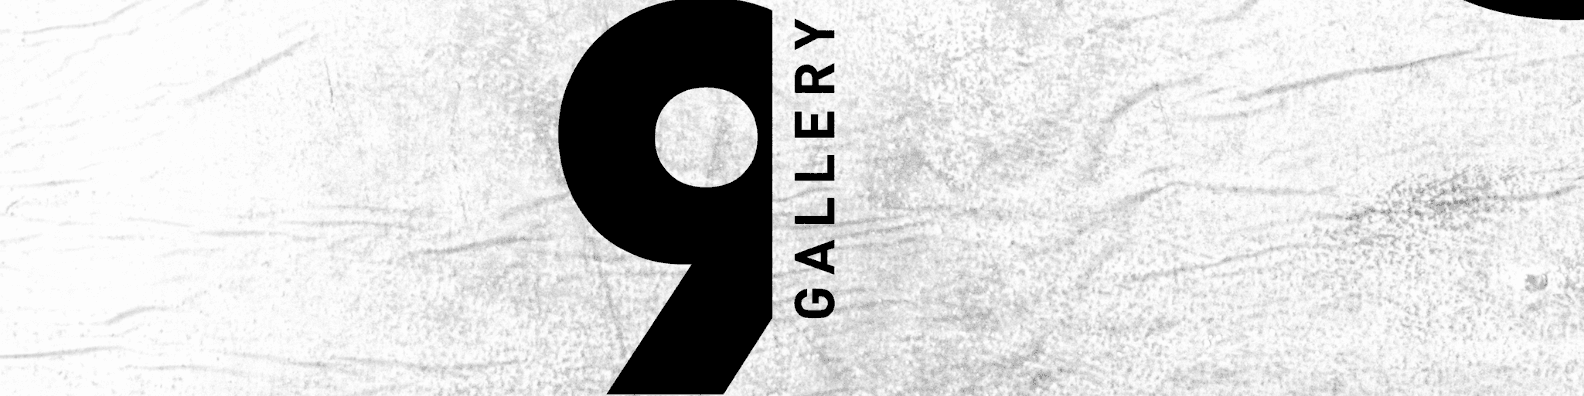 9thegallery banner